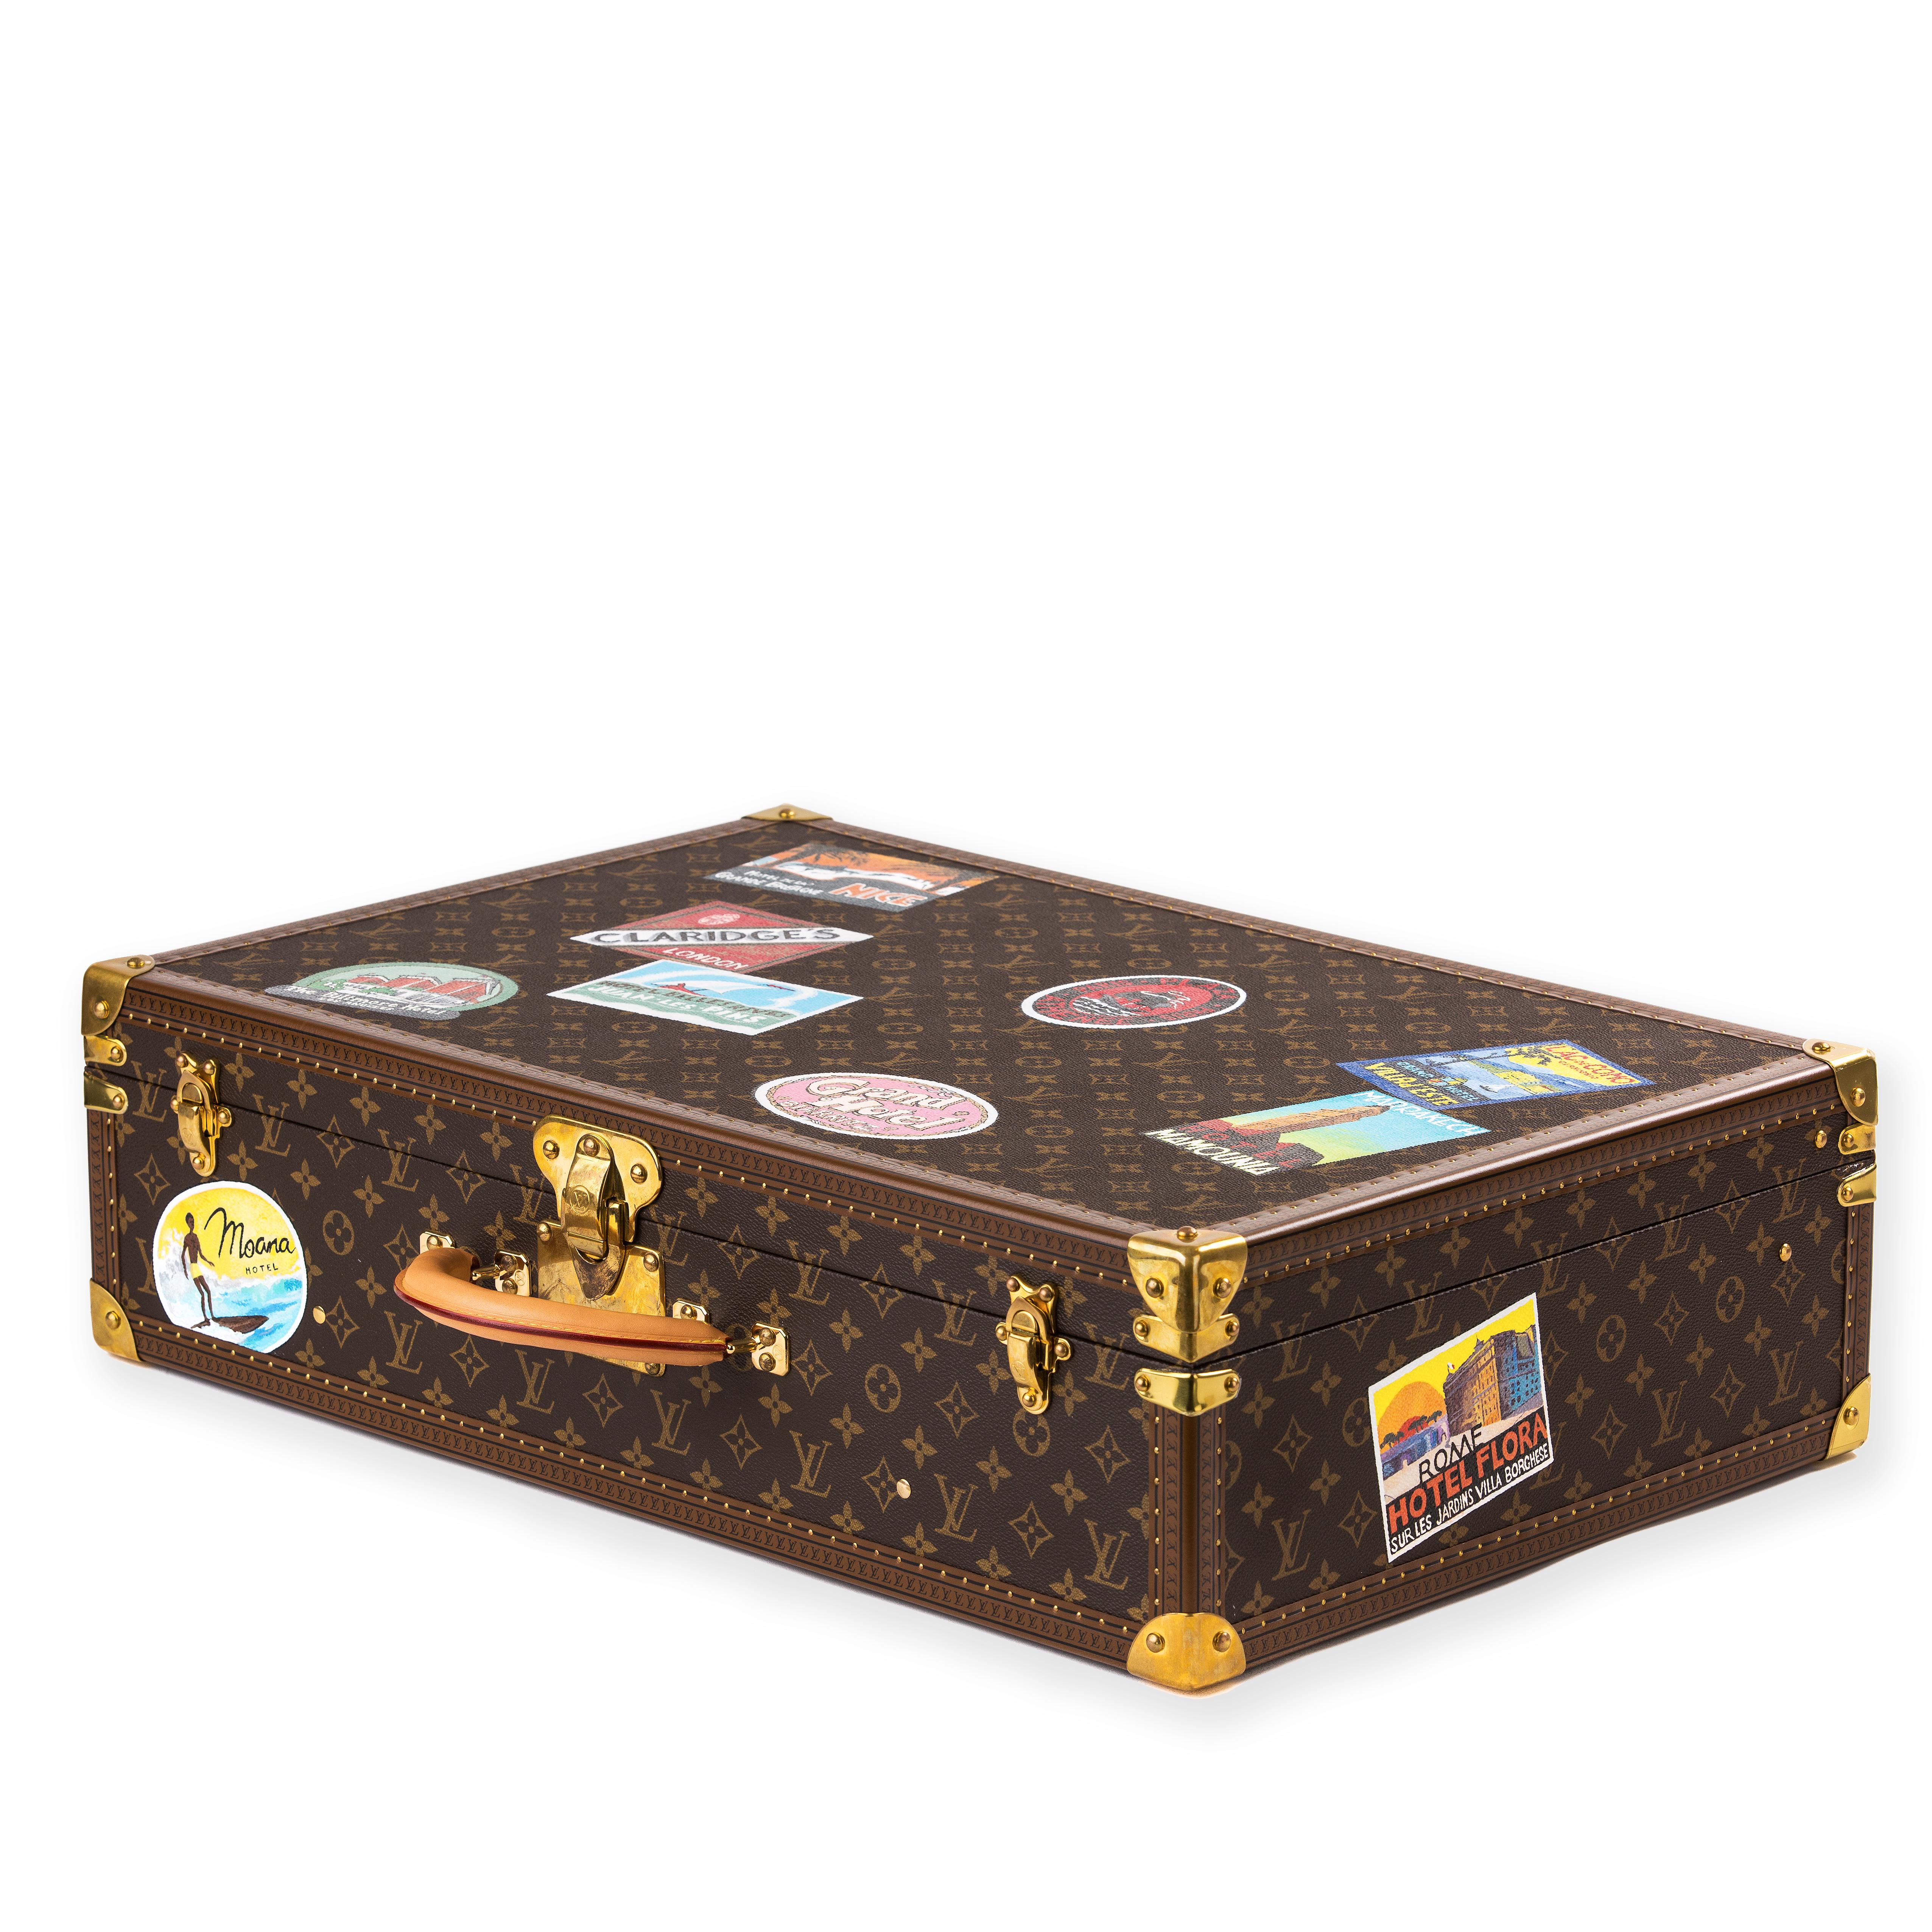 Louis Vuitton Bisten Suitcase 65 Monogram with Stickers In New Condition For Sale In Double Bay, NSW